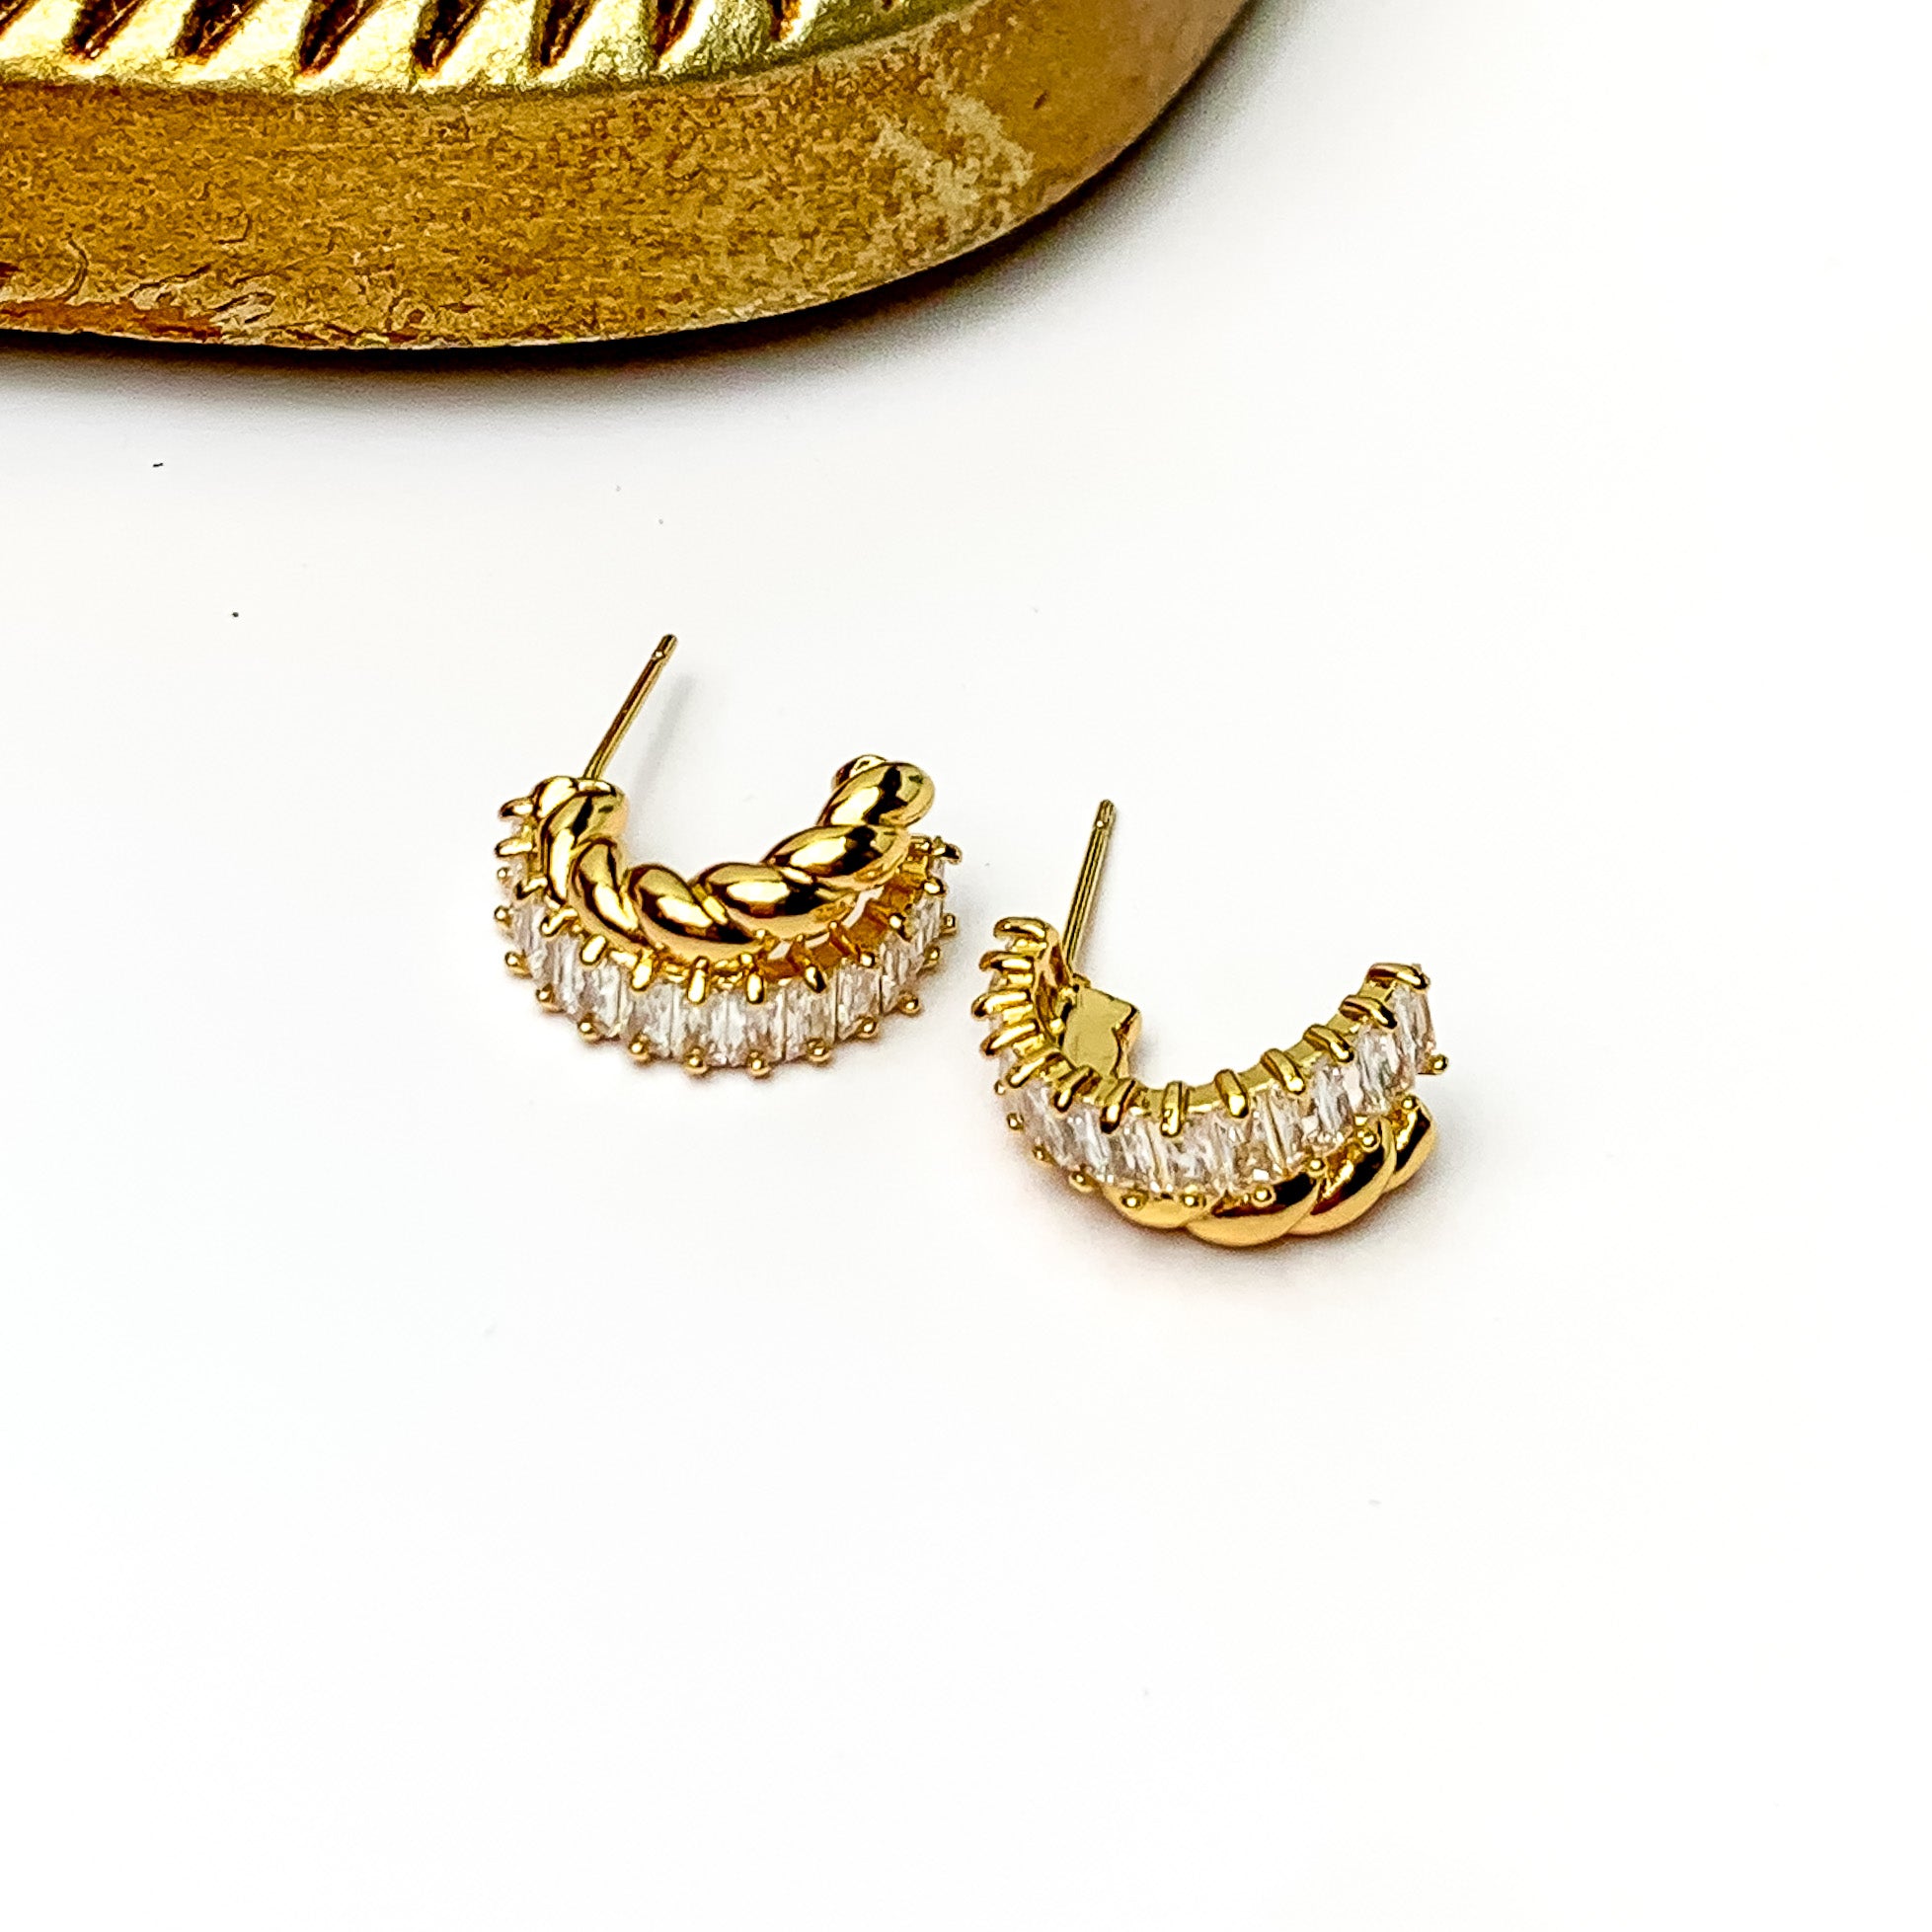 Kinsey Designs | Zuri Hoop Earrings with CZ Crystals - Giddy Up Glamour Boutique